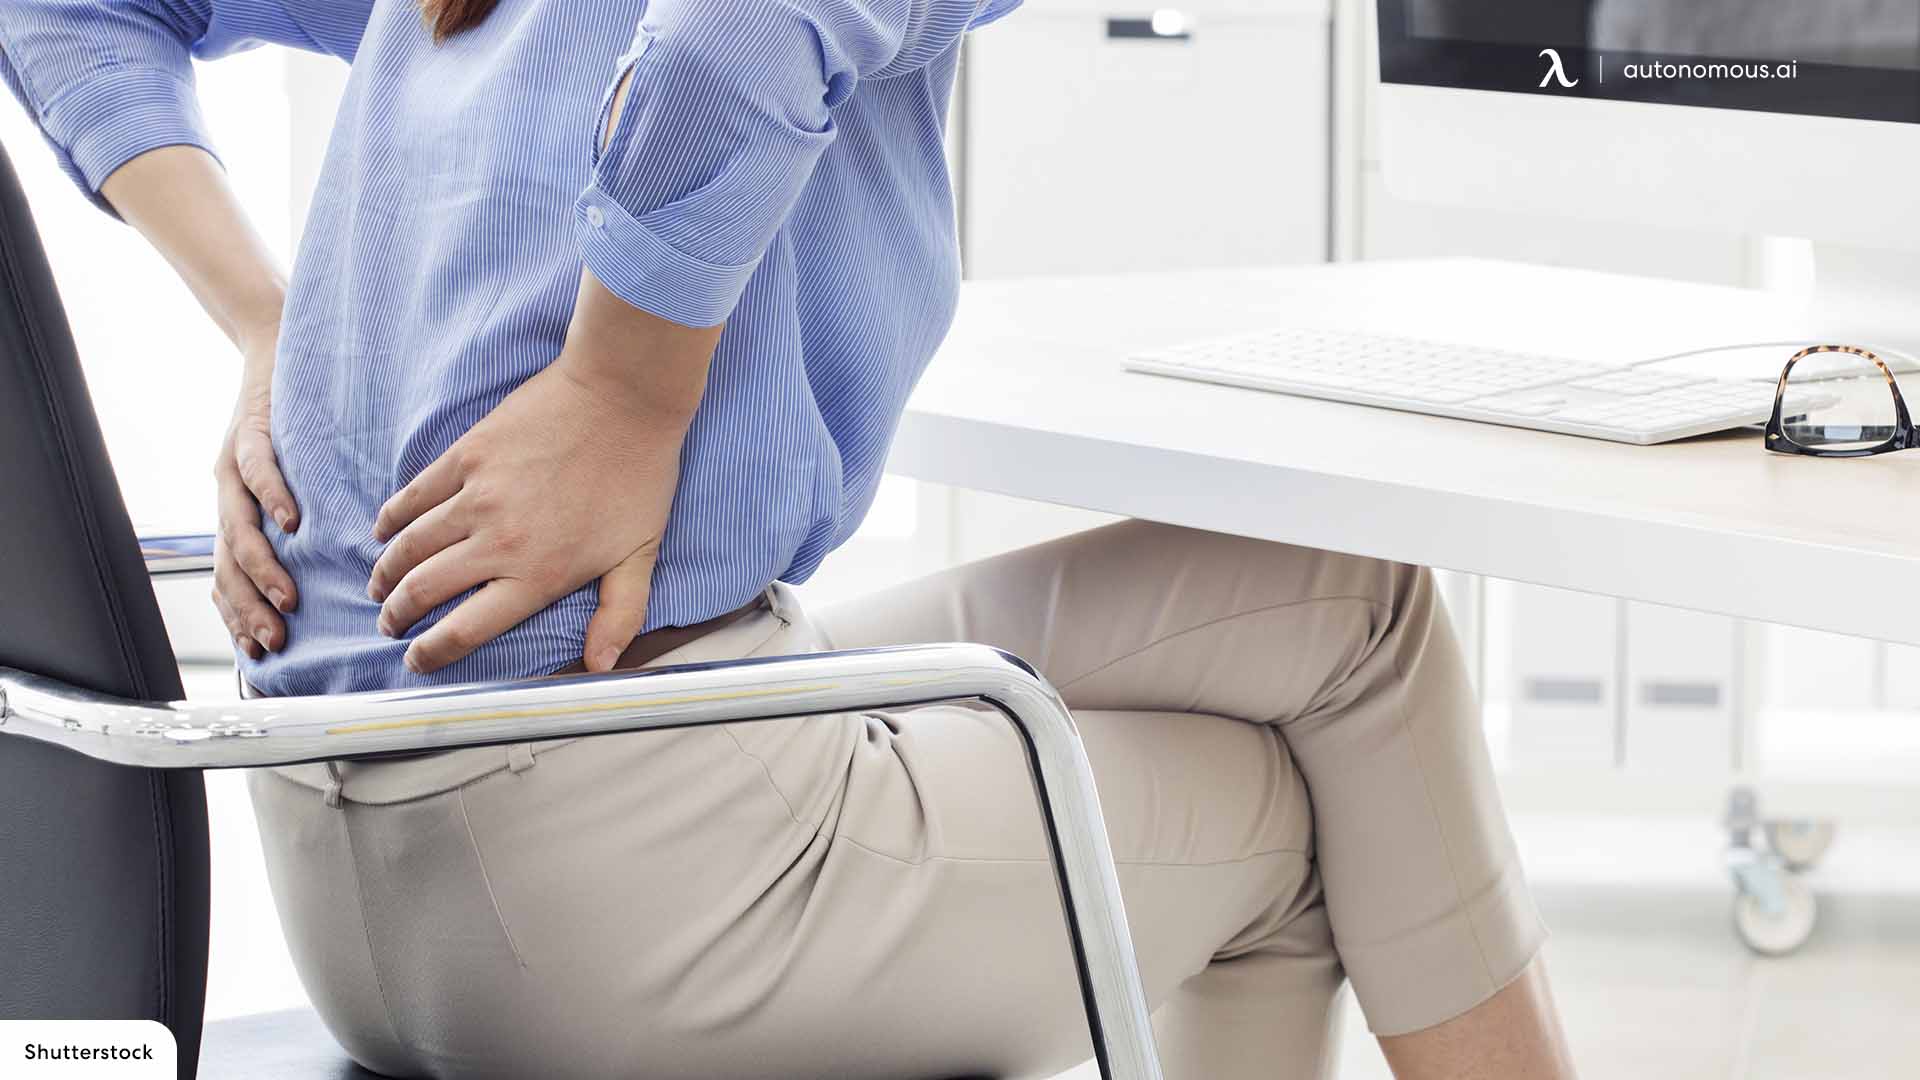 Does an Ergonomic Stool Help with Back Pain?